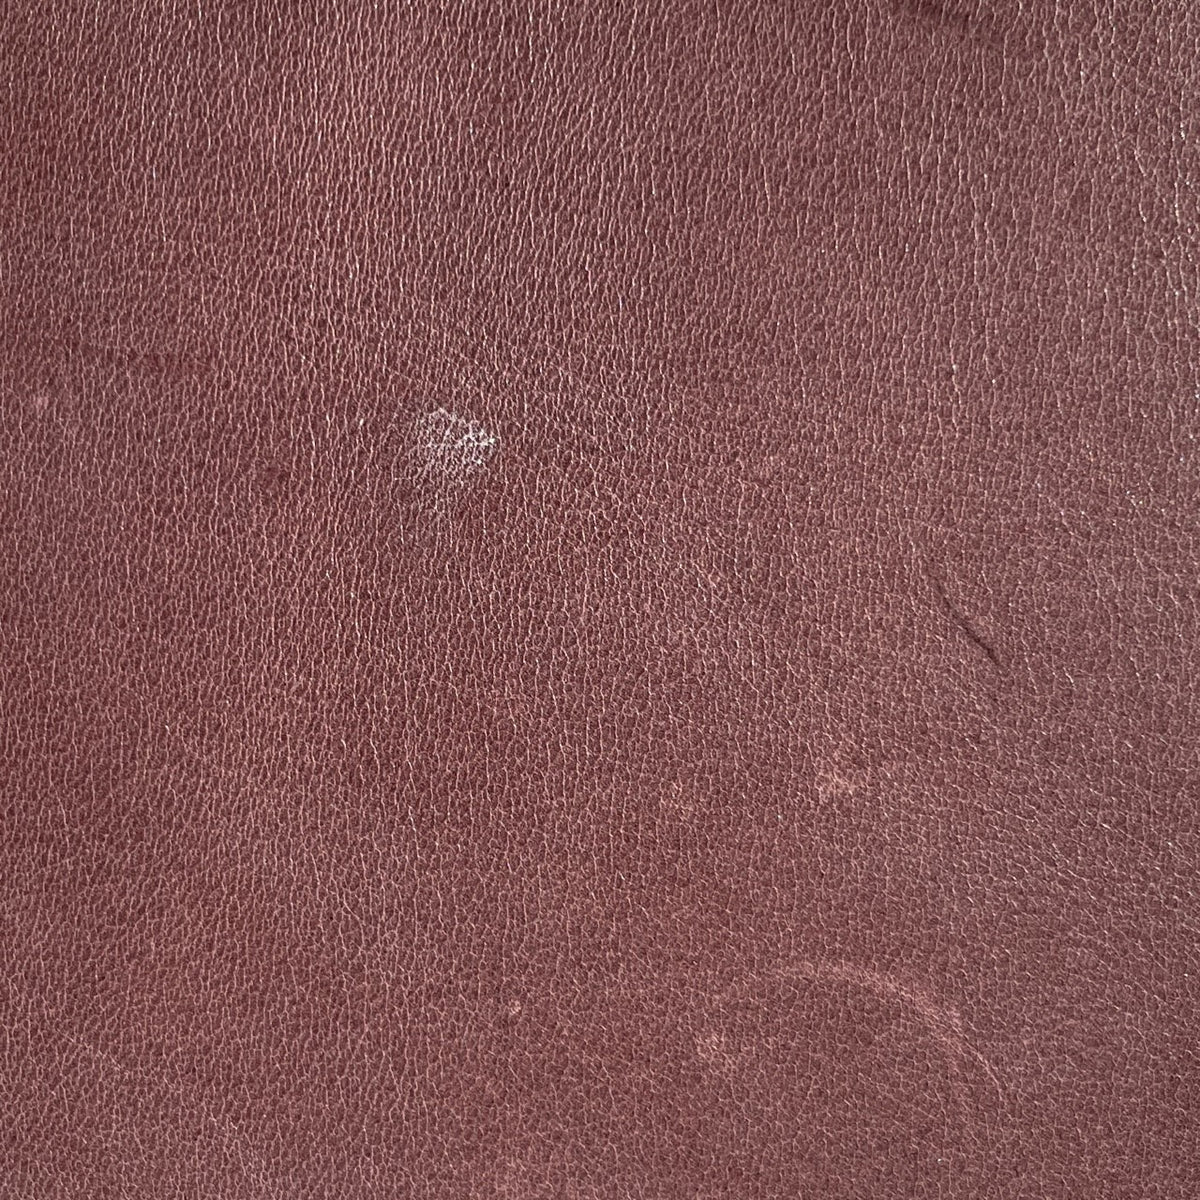 Tuscany Cow Quarter Sides | Chocolate | 1.8  -2.0mm | 5-6 sq.ft | From $125 ea.